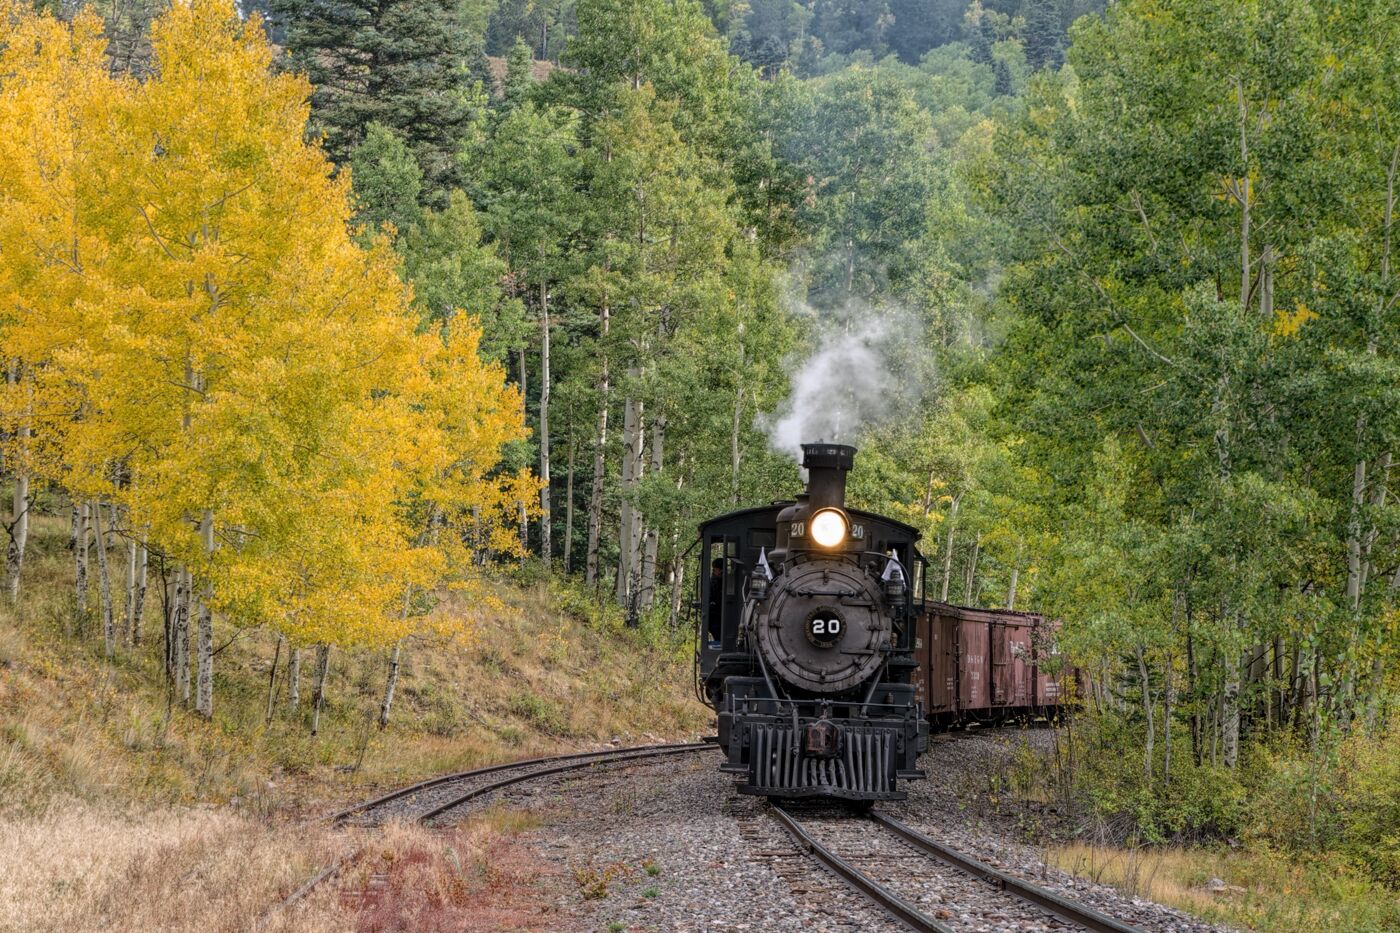 Rio Grande Southern number 20 makes it way to Oiser on a colorful fall day on the Cumbres Toltec Scenic RR.